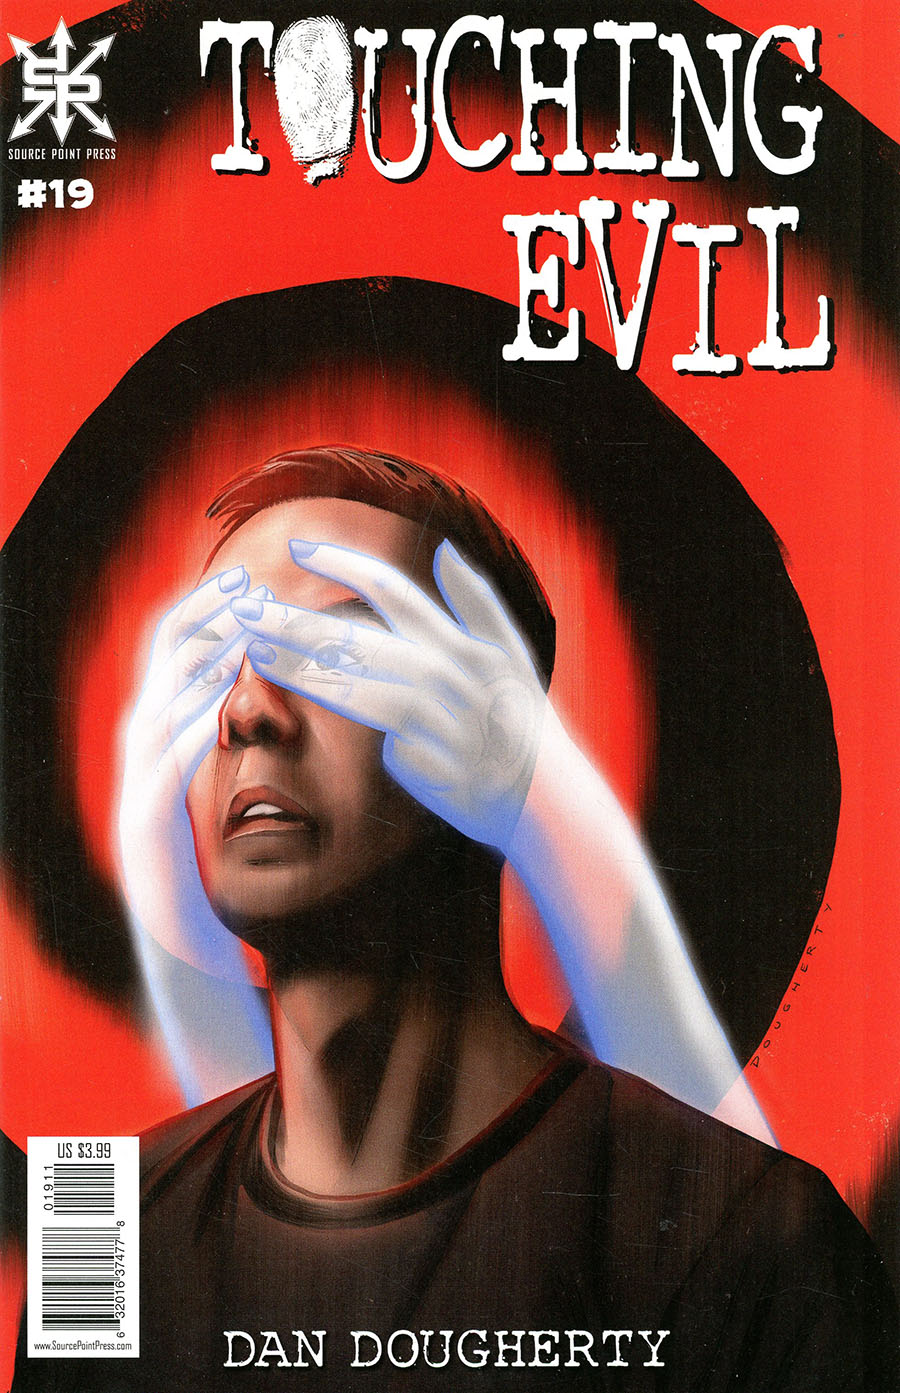 Touching Evil #19